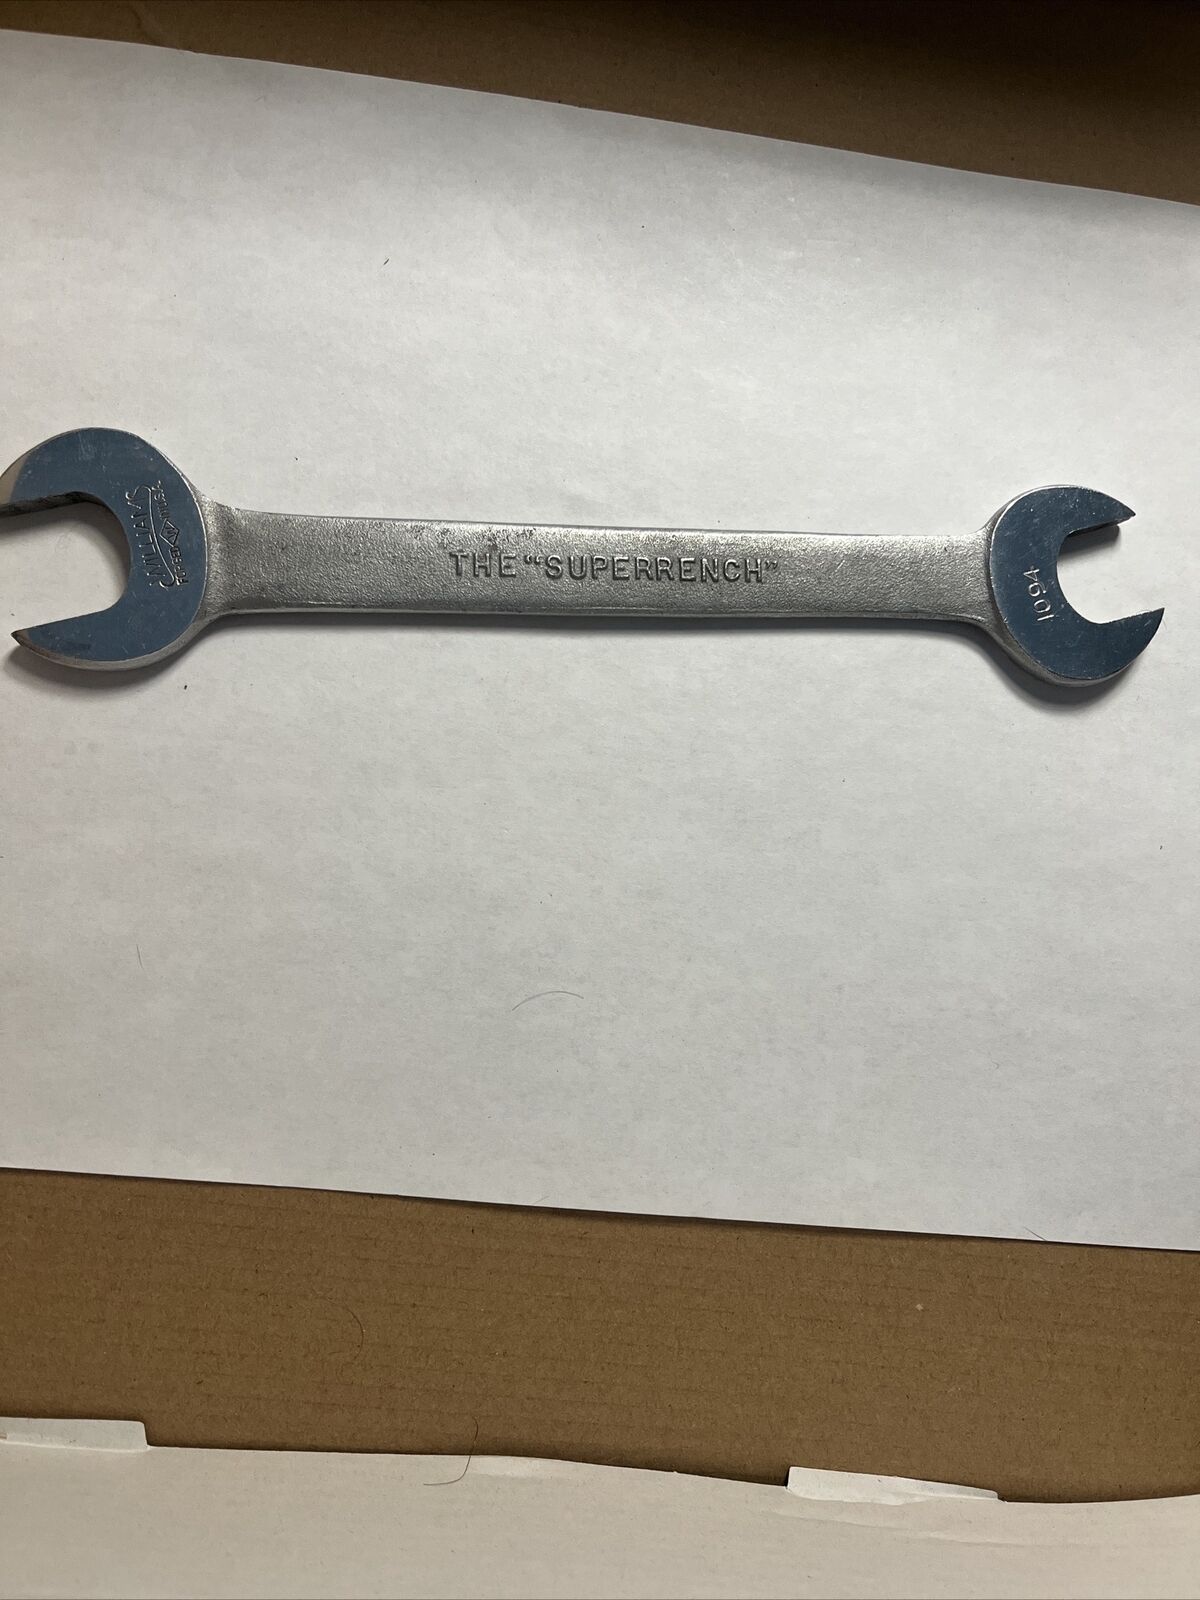 Forged Williams Superrench 3/4x 7/8 S.A.E 1945-47 Tappet Wrench 1094